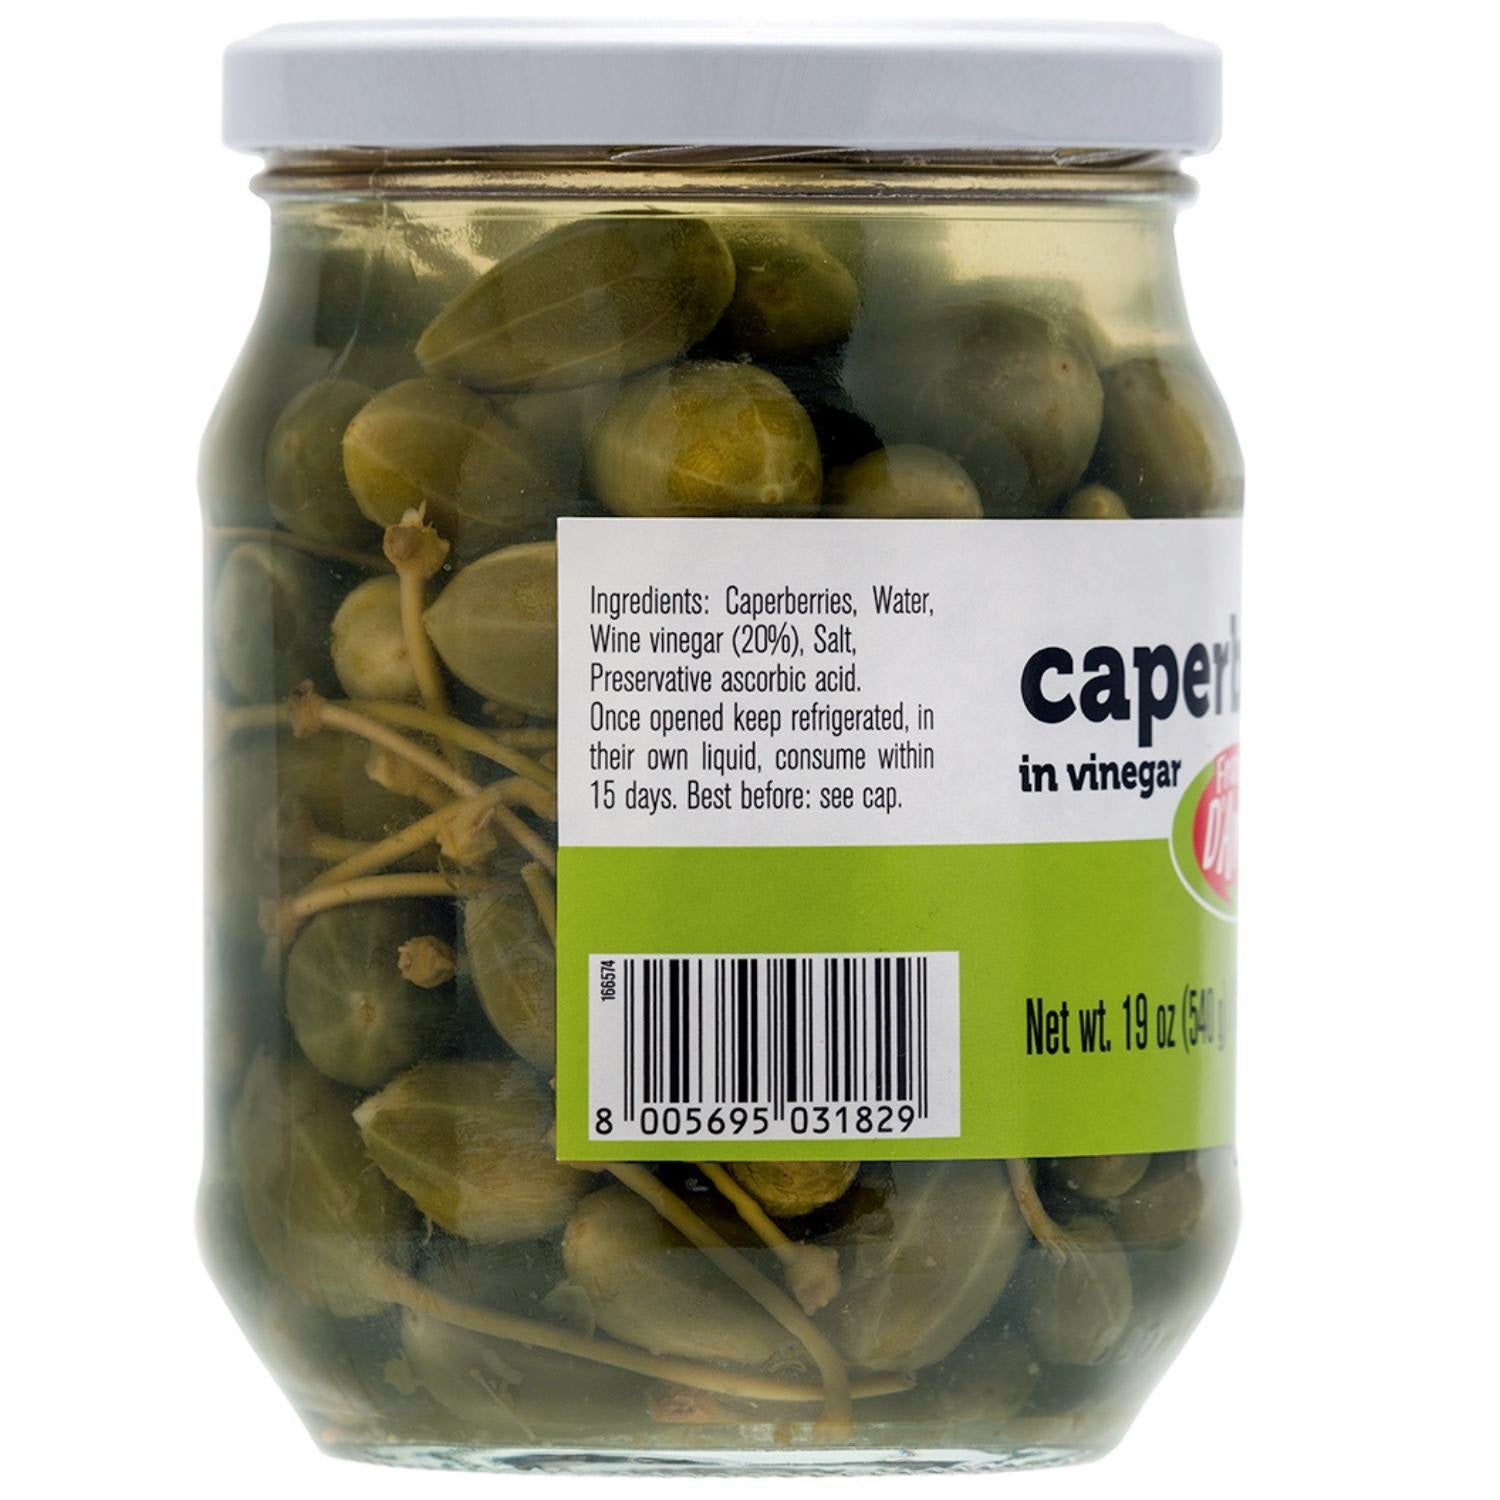 Fratelli D'Amico Caperberries in vinegar, Pickled, Capers. Net Wt 19oz (540g)